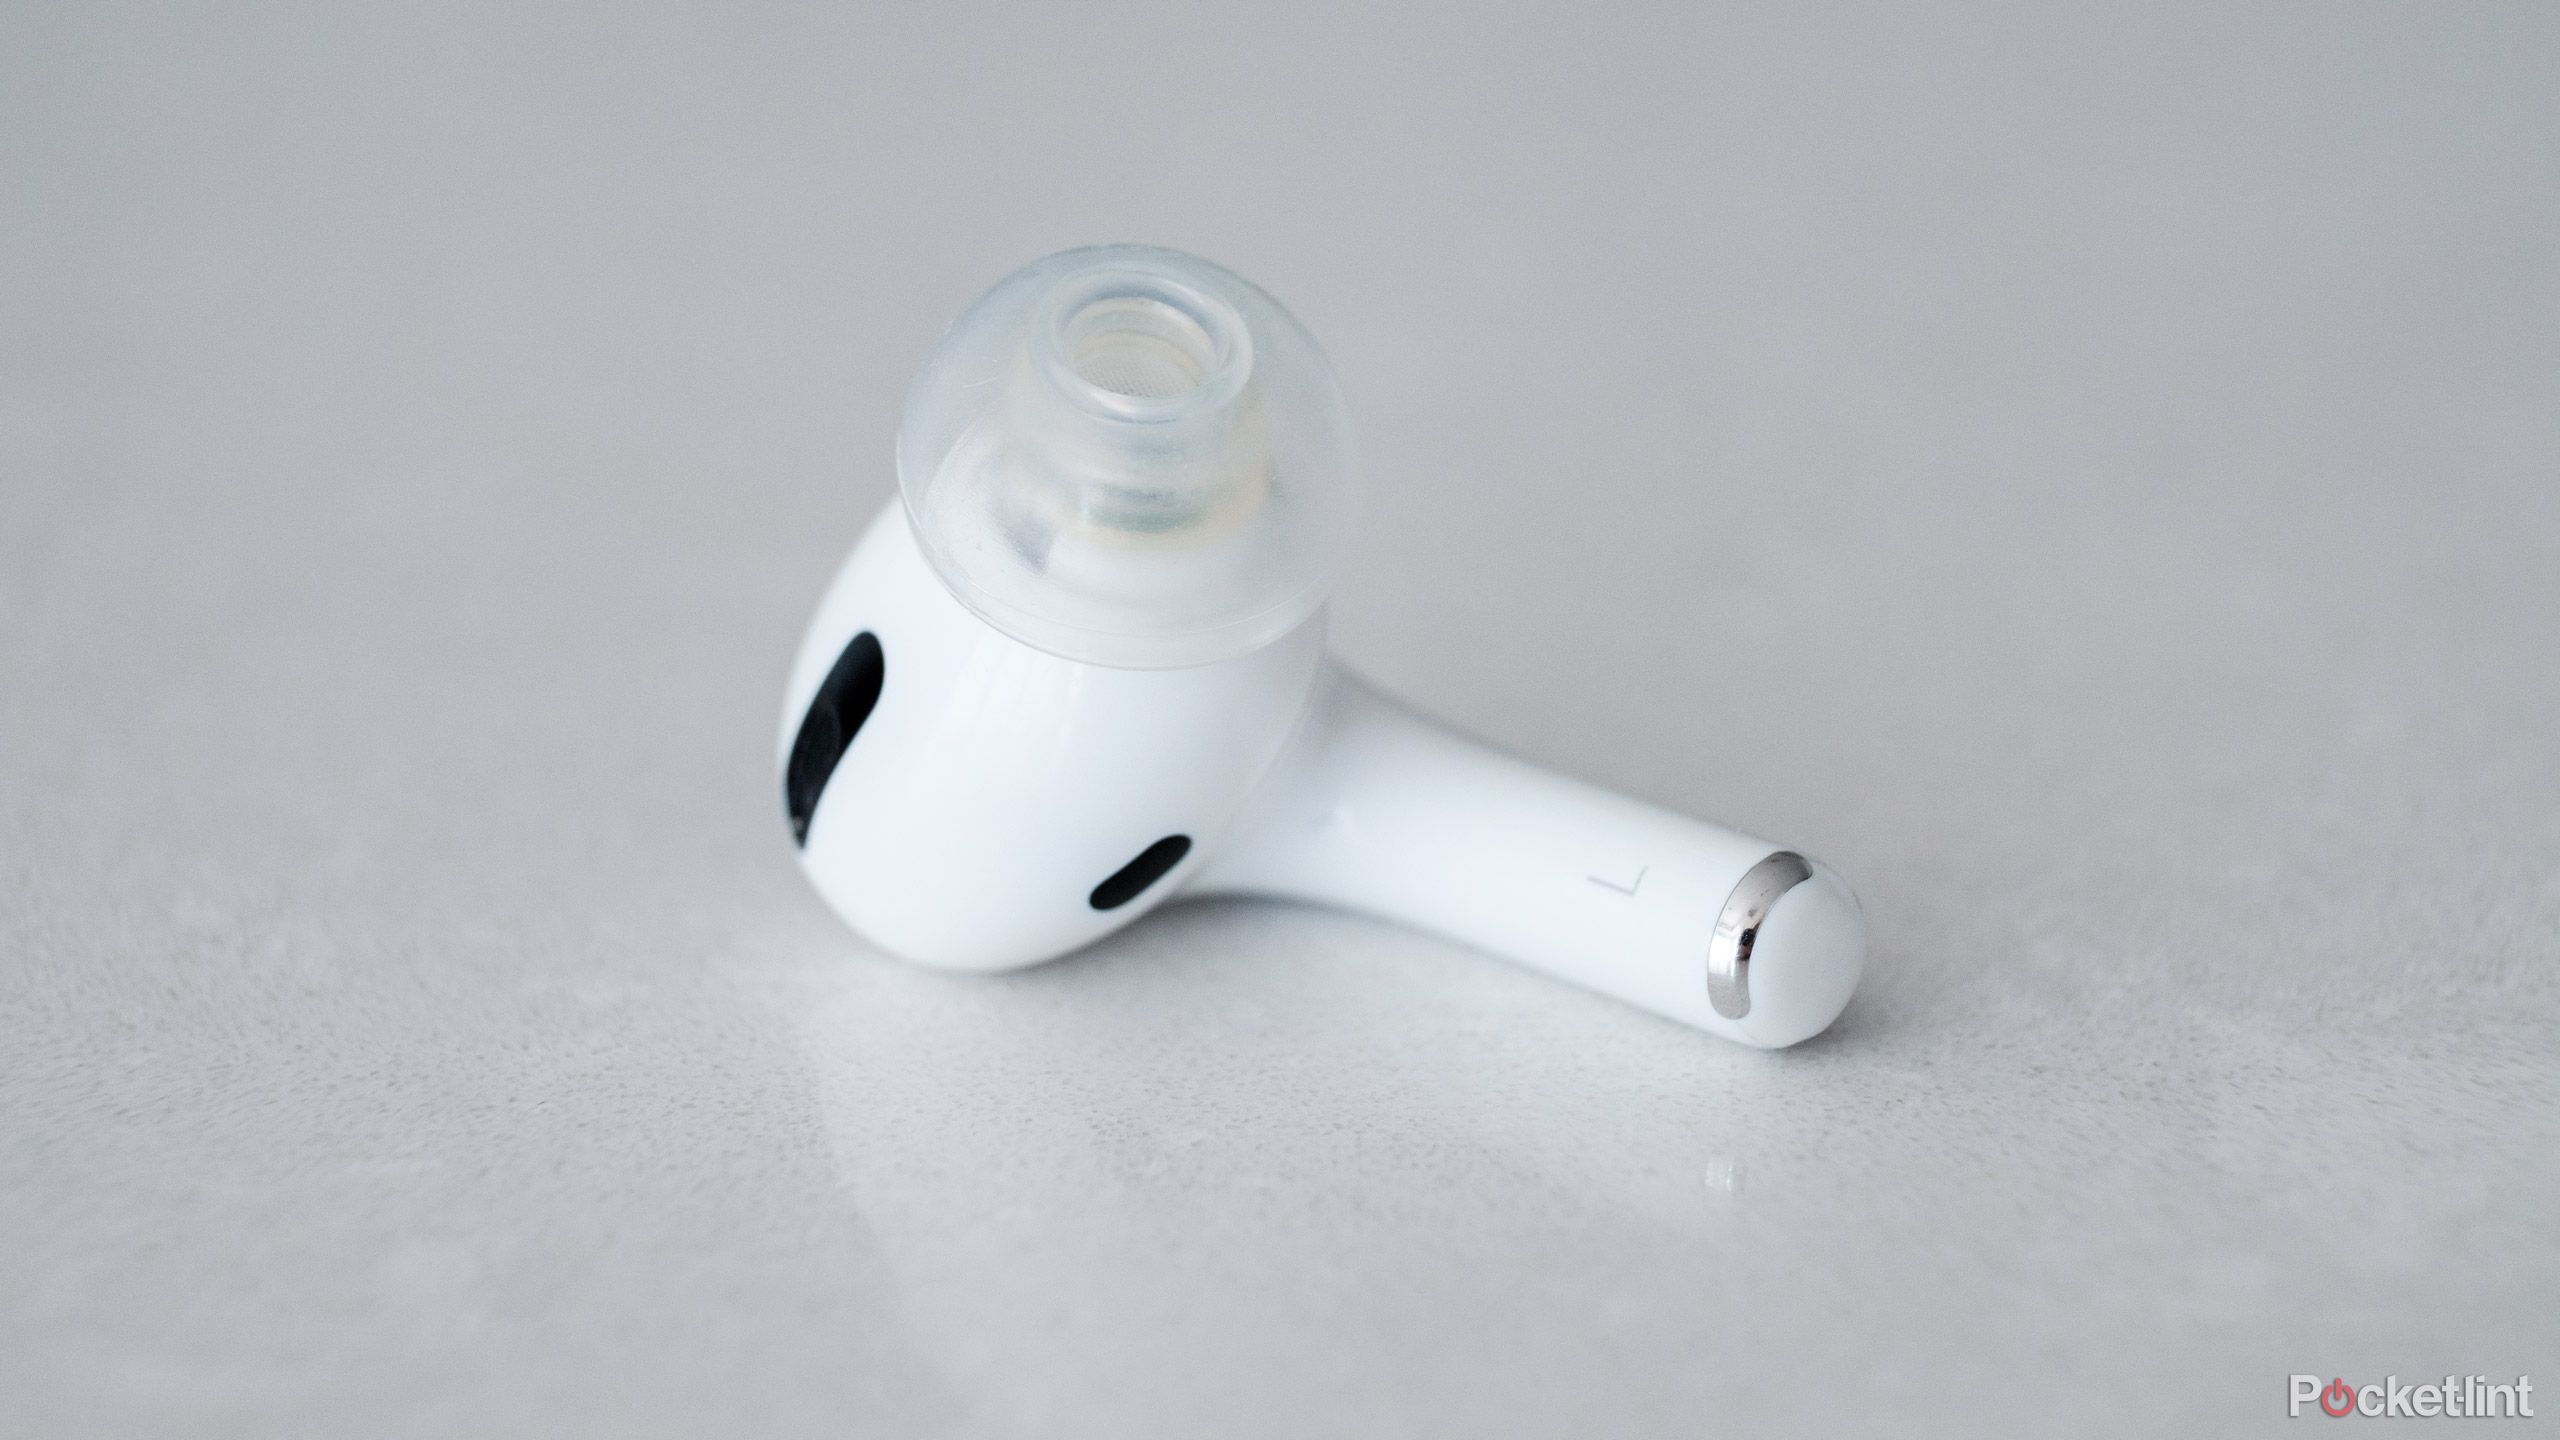 A single AirPods Pro ear bud with SpinFit ear tips